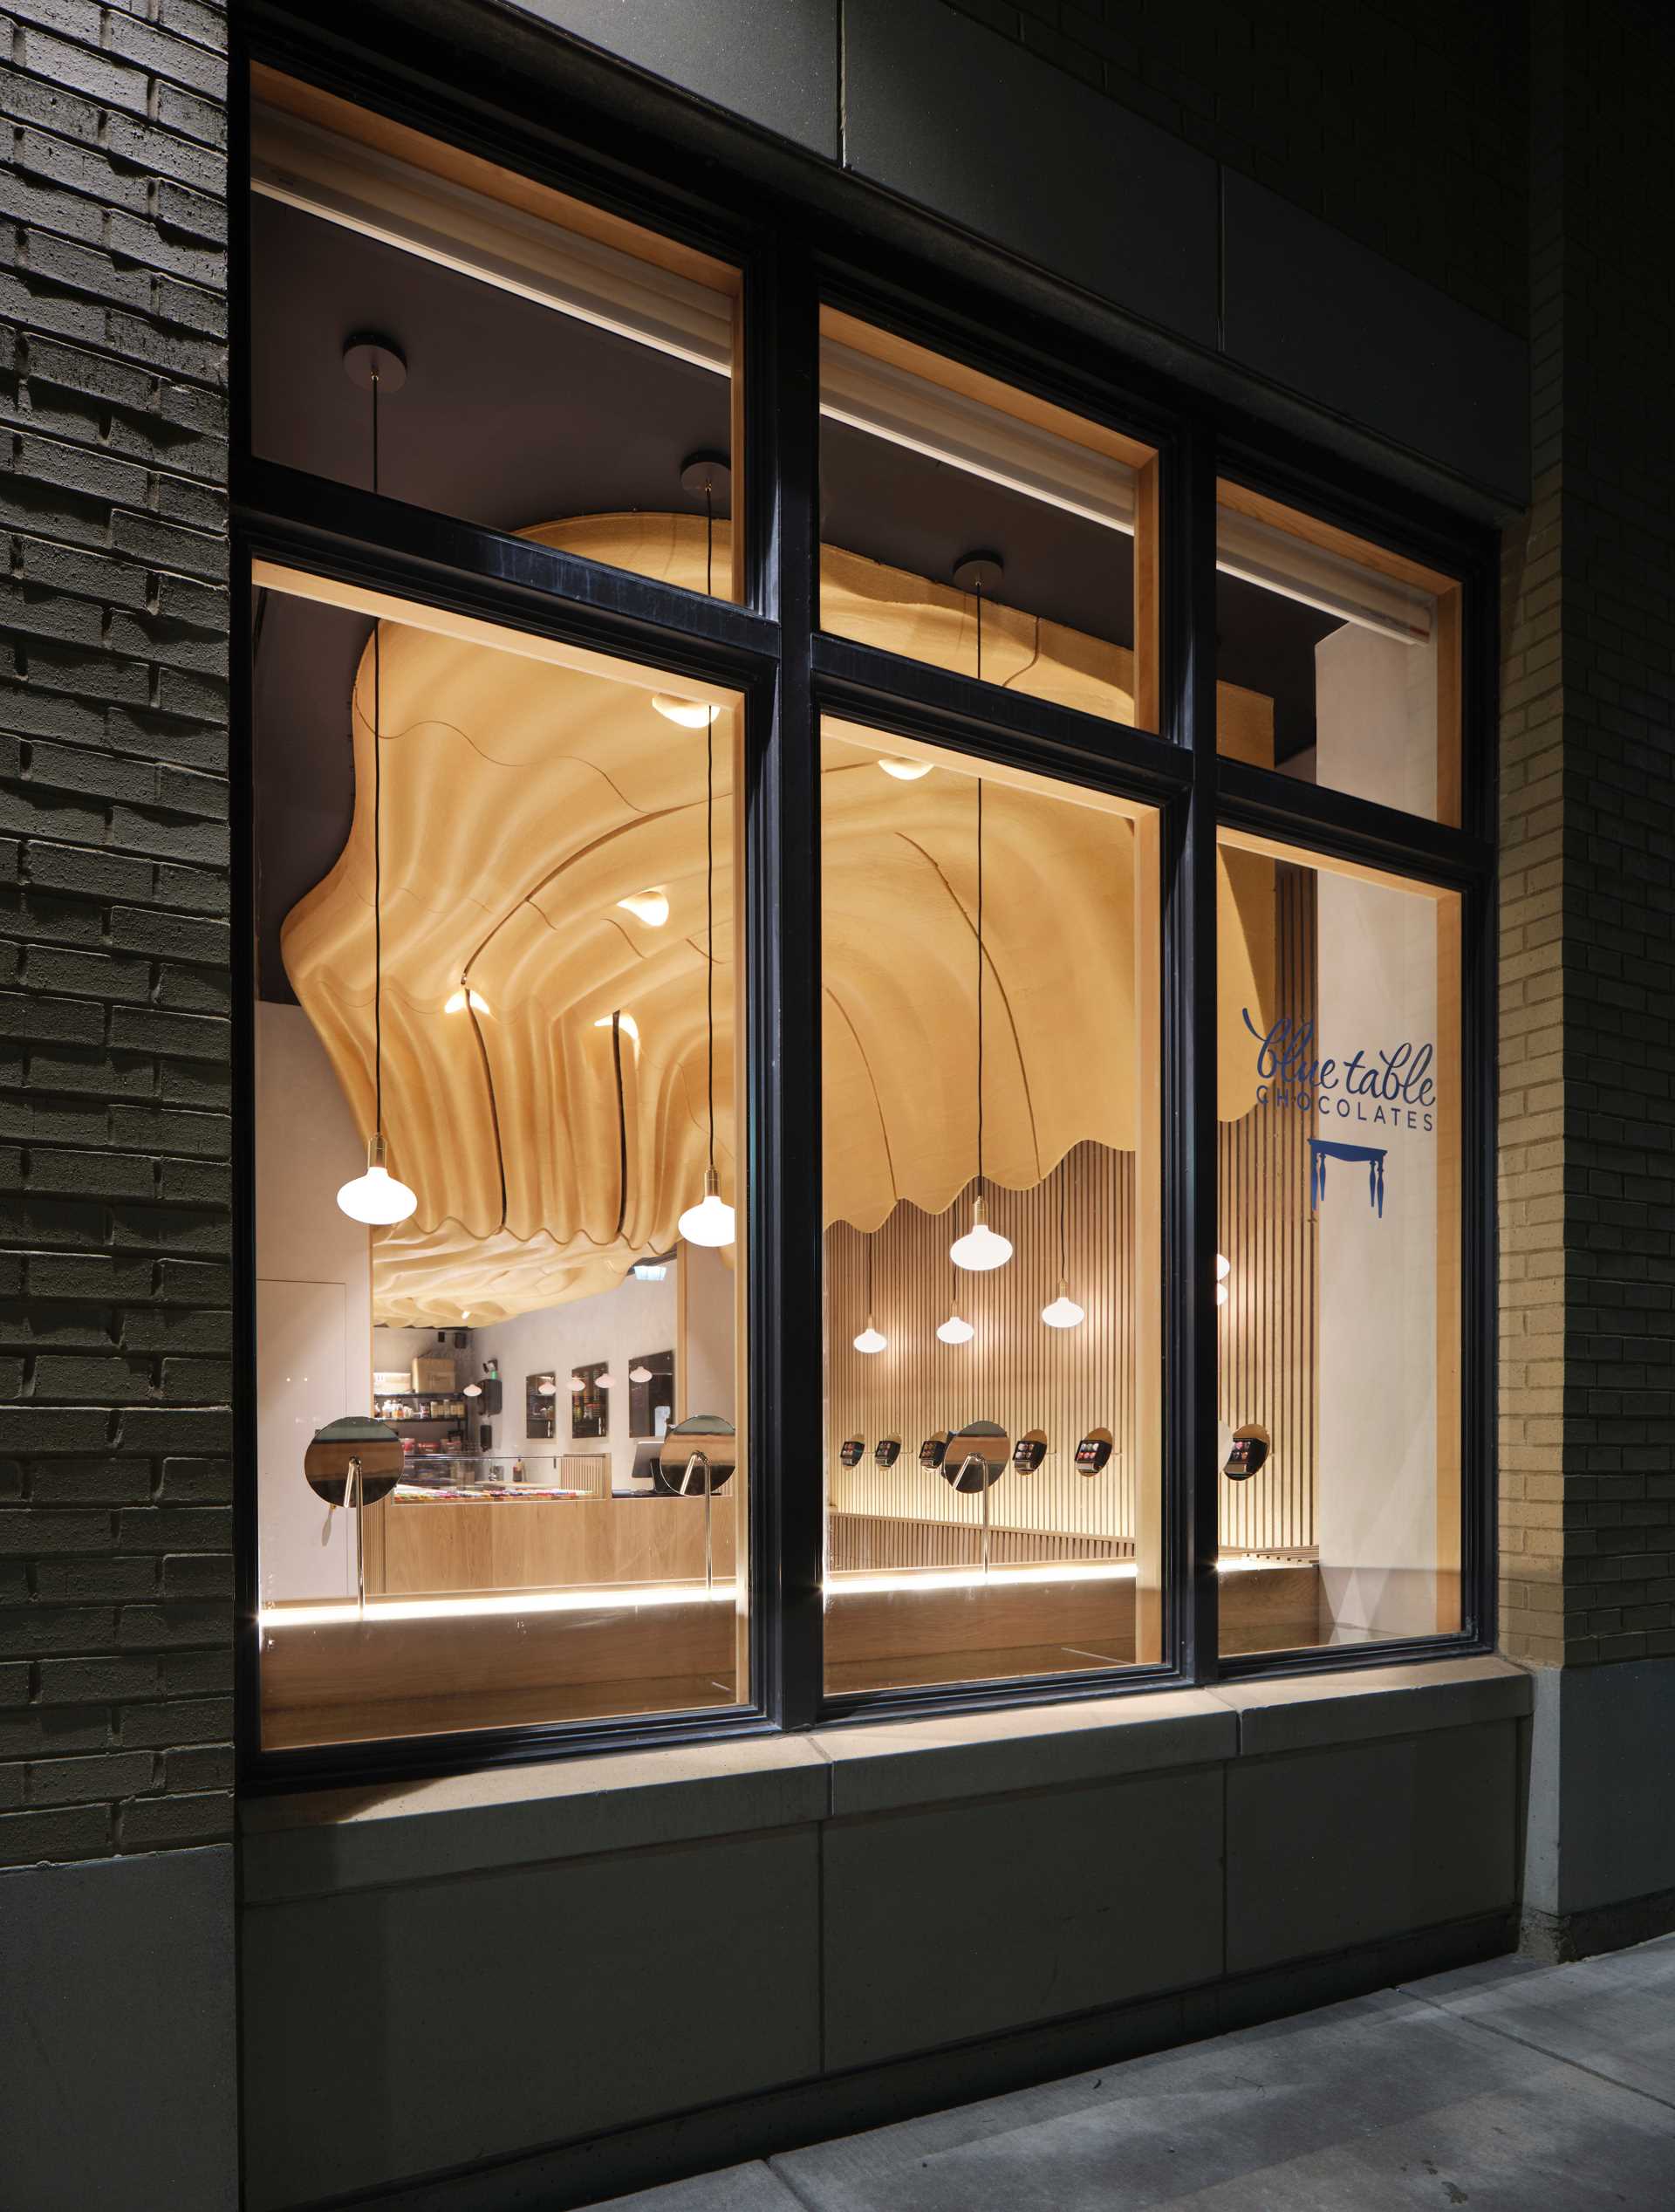 A modern retail chocolate store with a sculptural ceiling that was inspired by flowing untempered chocolate.